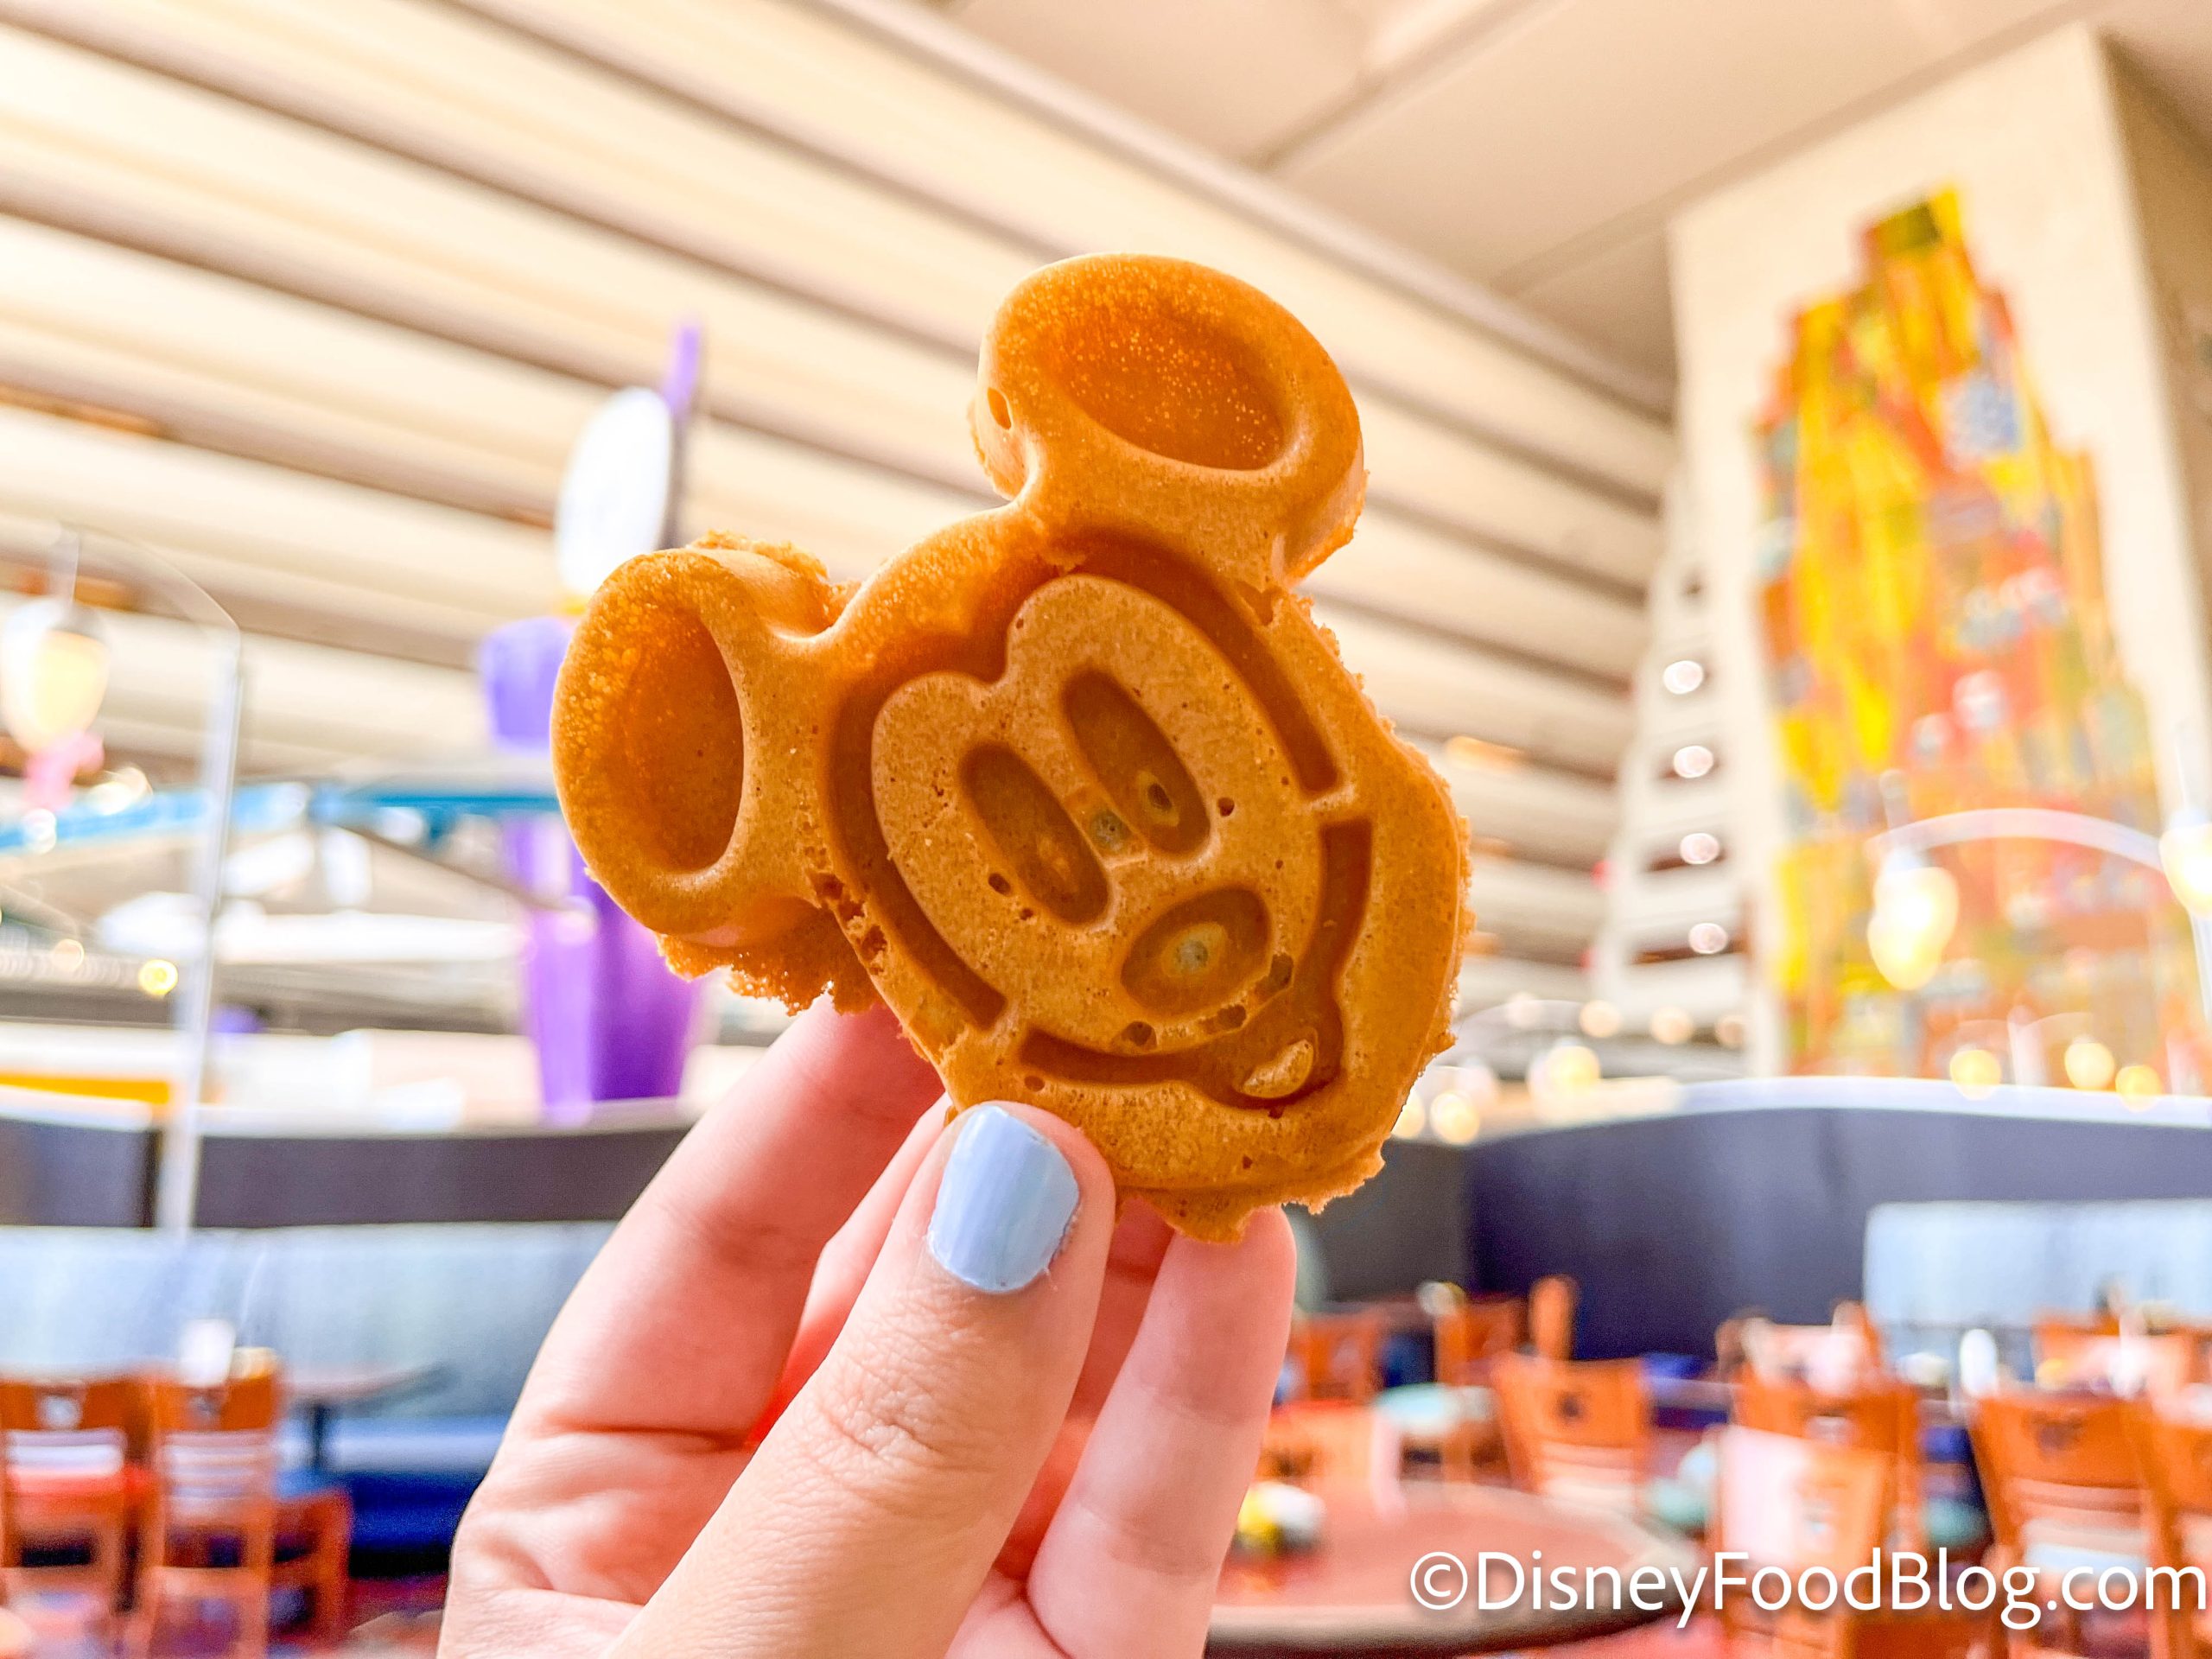 https://www.disneyfoodblog.com/wp-content/uploads/2023/08/wdw-2023-disneys-contemporary-resort-chef-mickeys-restaurant-character-meal-review-breakfast-mickey-waffle-scaled.jpg